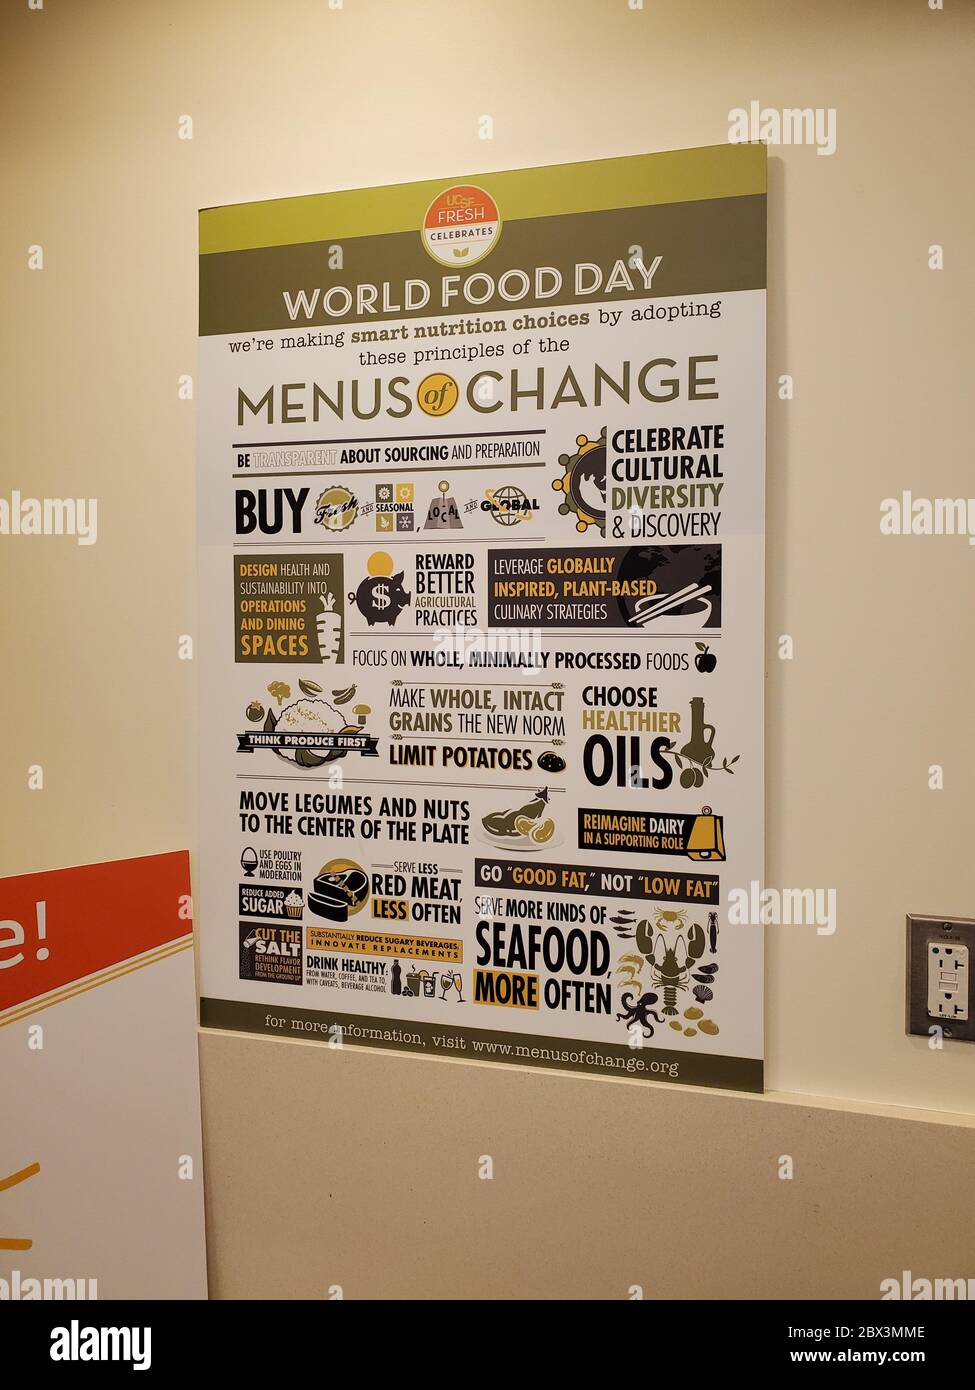 Poster announcing healthy food menu changes for World Food Day at UCSF medical center, San Francisco, California, April 9, 2020. () Stock Photo